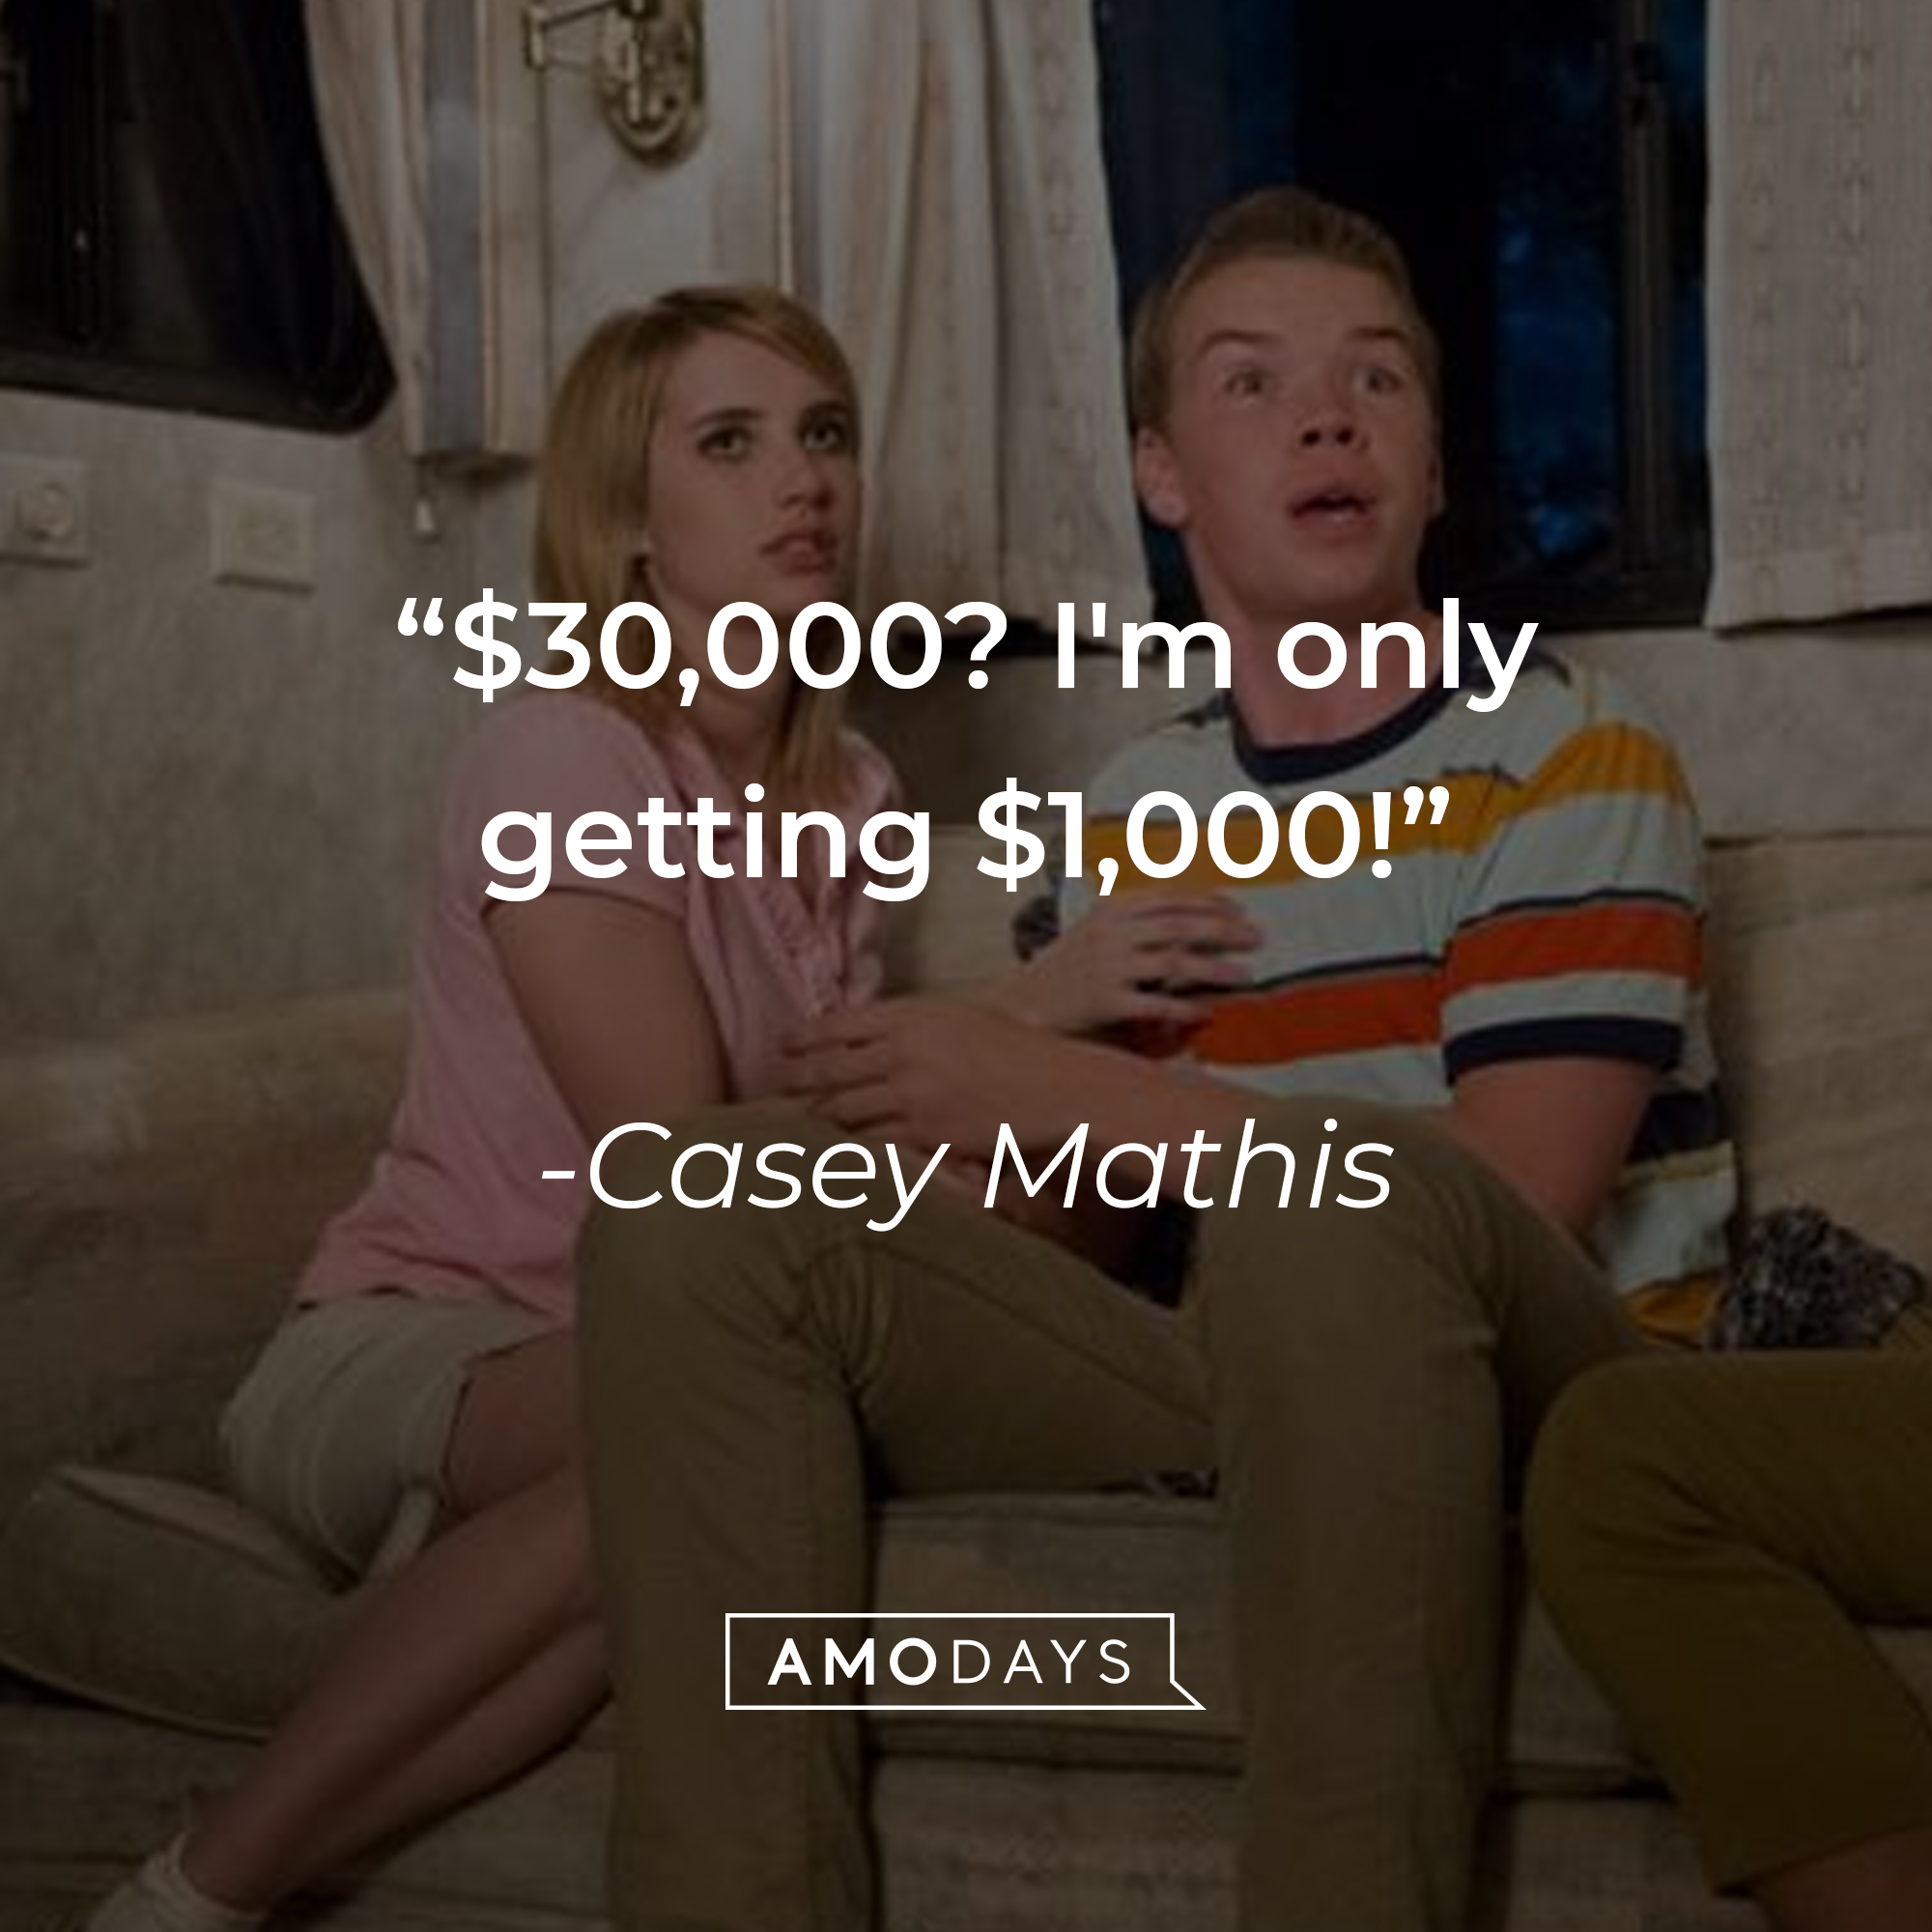 Casey Mathis' quote: “$30,000? I'm only getting $1,000!” | Source: facebook.com/WereTheMillersUK